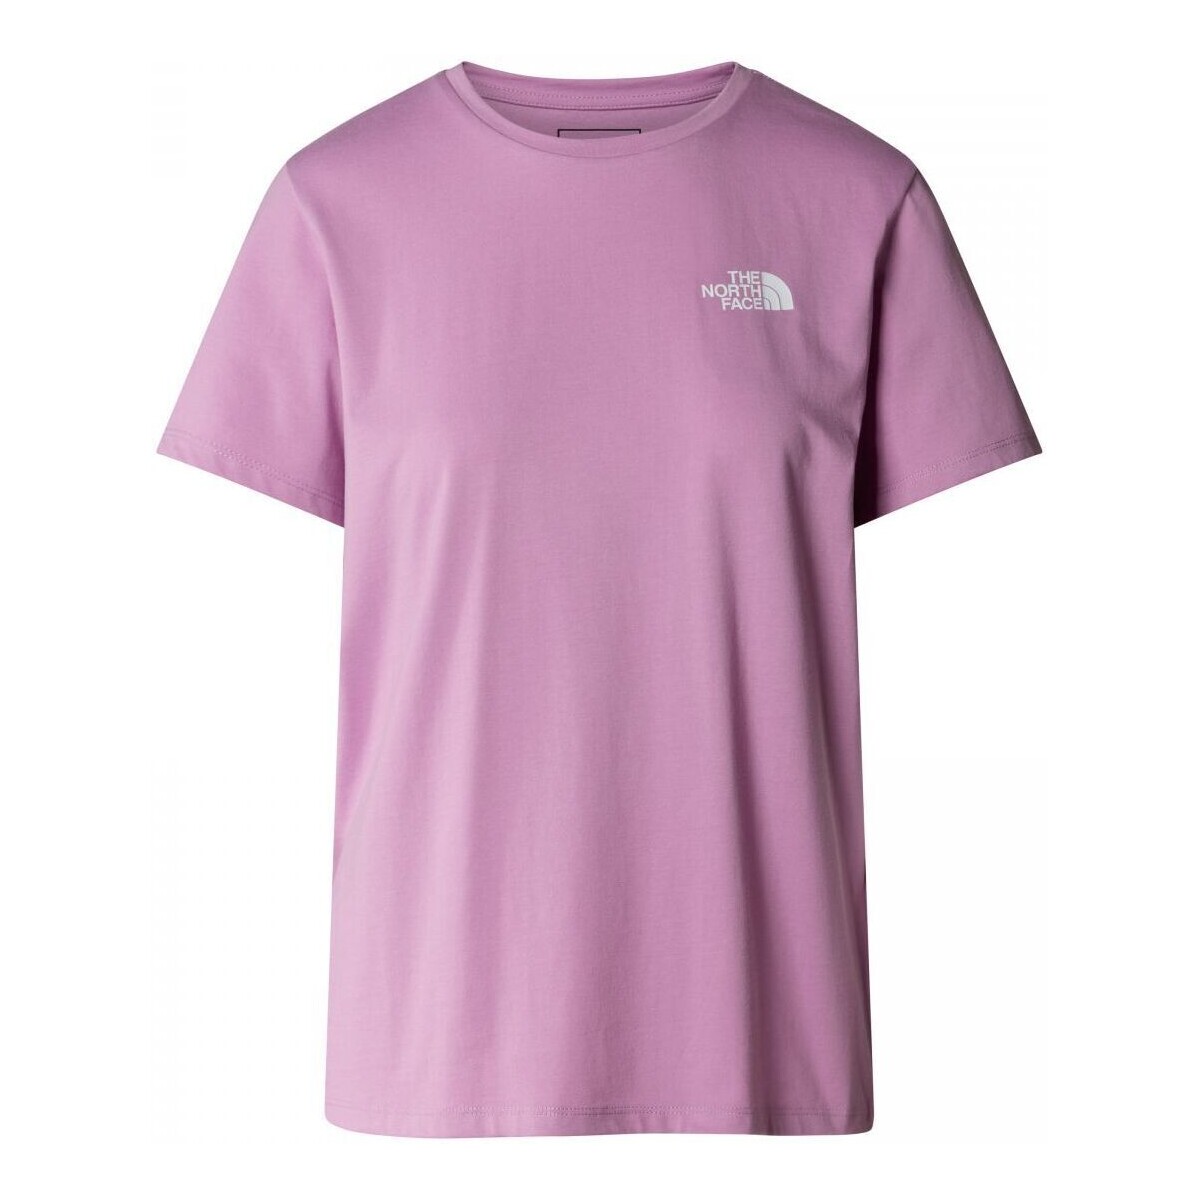 Kleidung Herren T-Shirts & Poloshirts The North Face NF0A882V W FOUNDATION MOUNTAIN-PO2 MINERAL PURPLE Violett